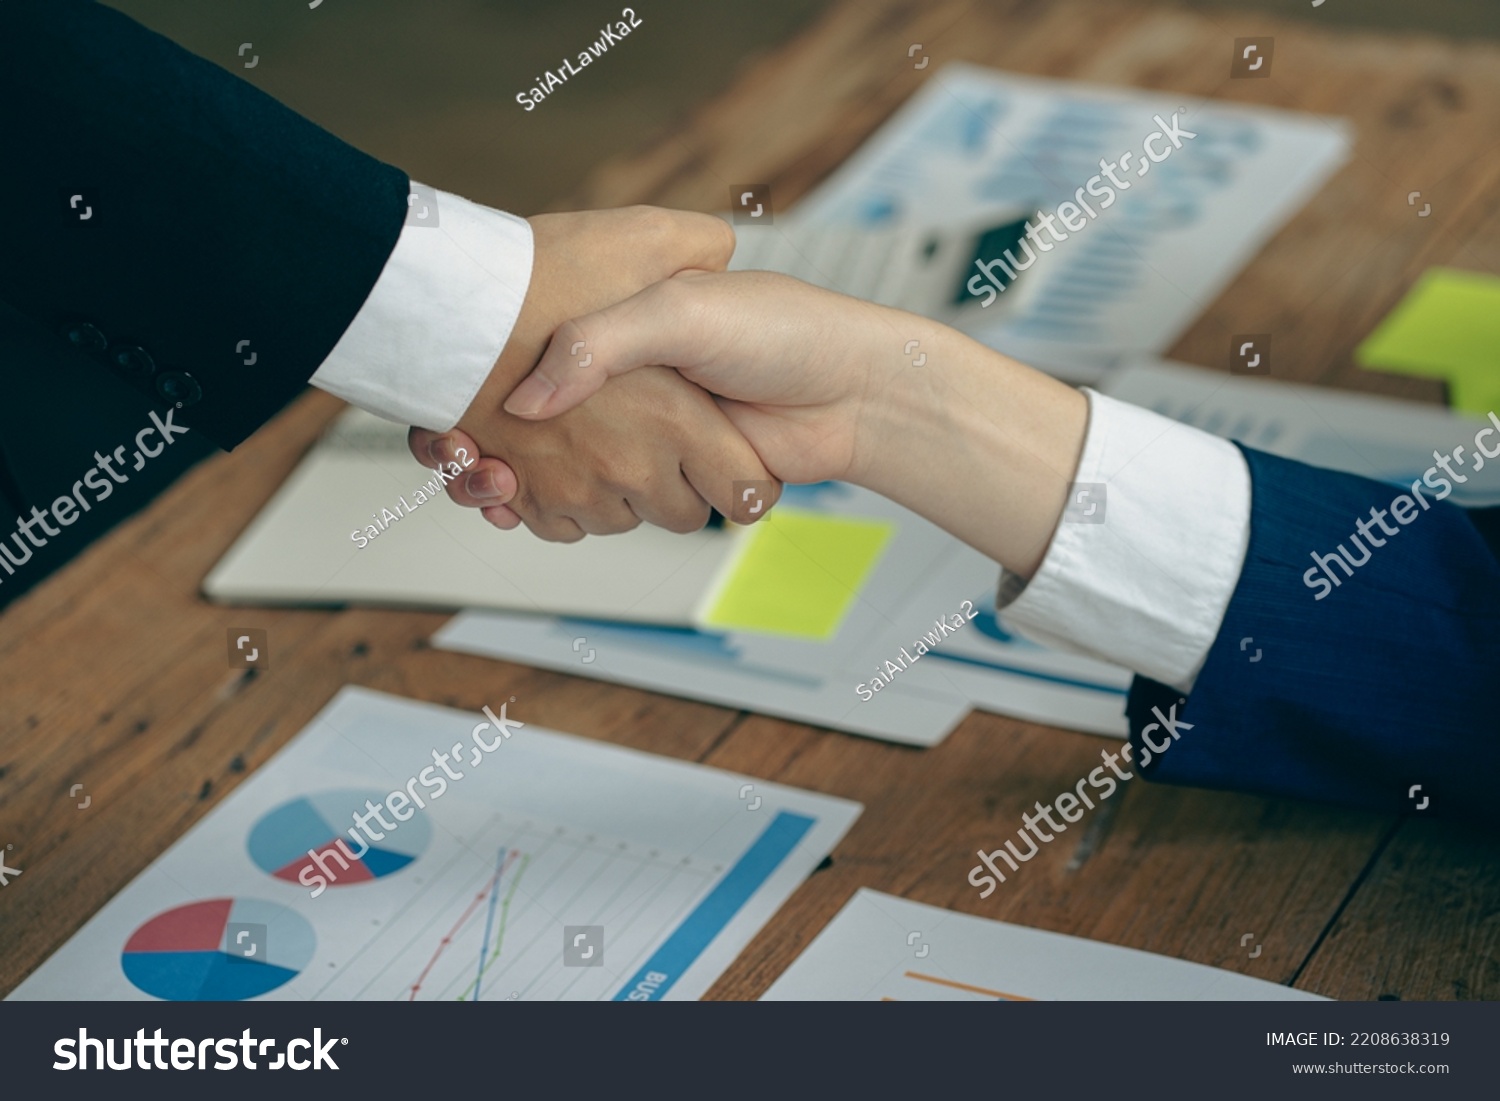 business people shake hands to make an agreement during a board meeting in the office Teamwork, agreement, cooperation, real estate business concept. #2208638319